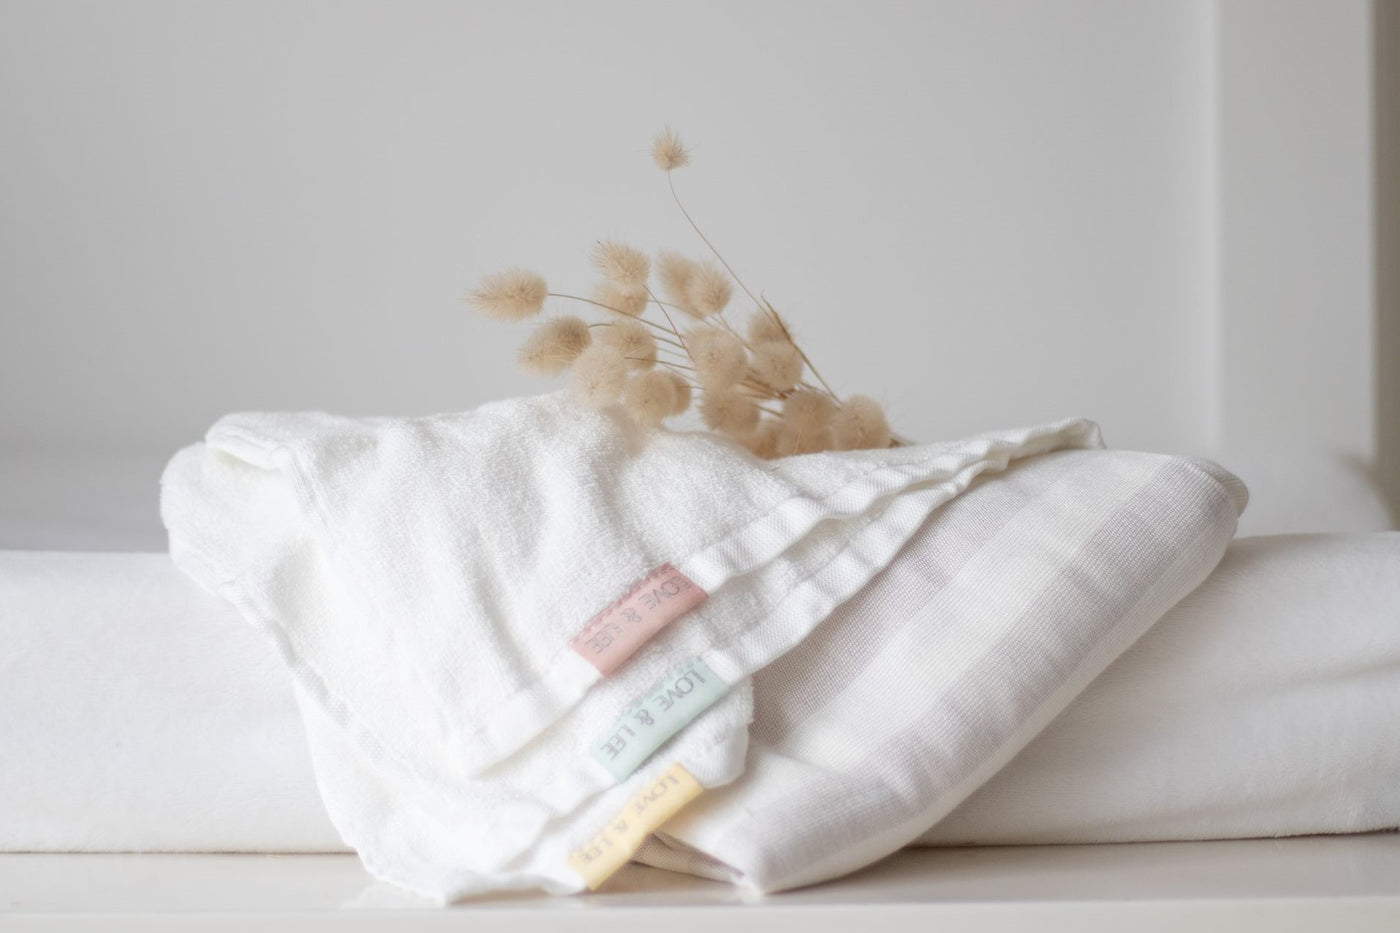 About bamboo blankets and washcloths